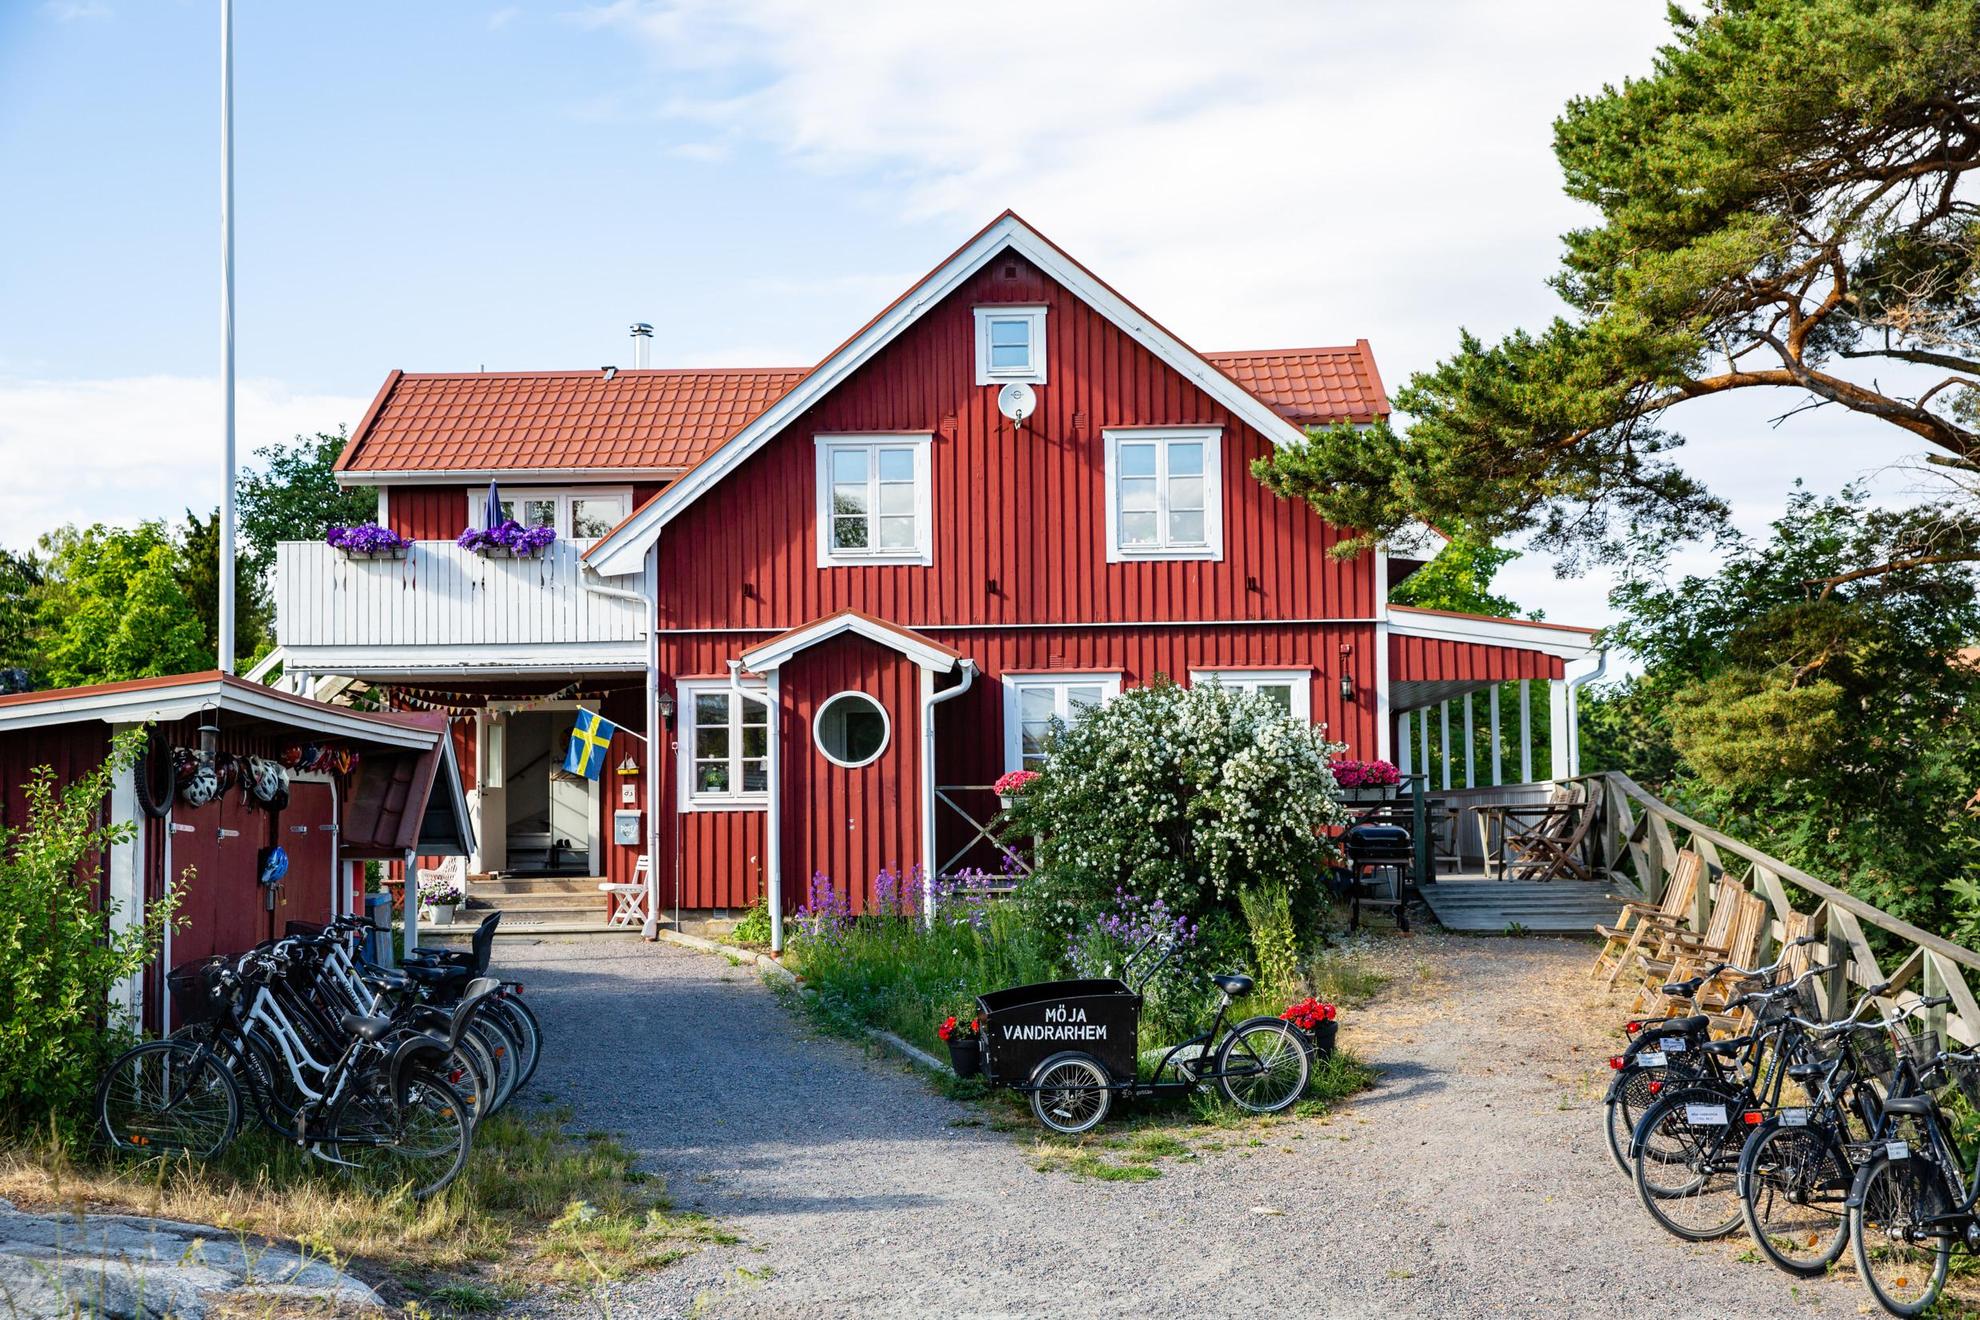 A red wooden house with white trims during summer. Outside the house is several bicycles. On one bike it says "Möja Vandrarhem".